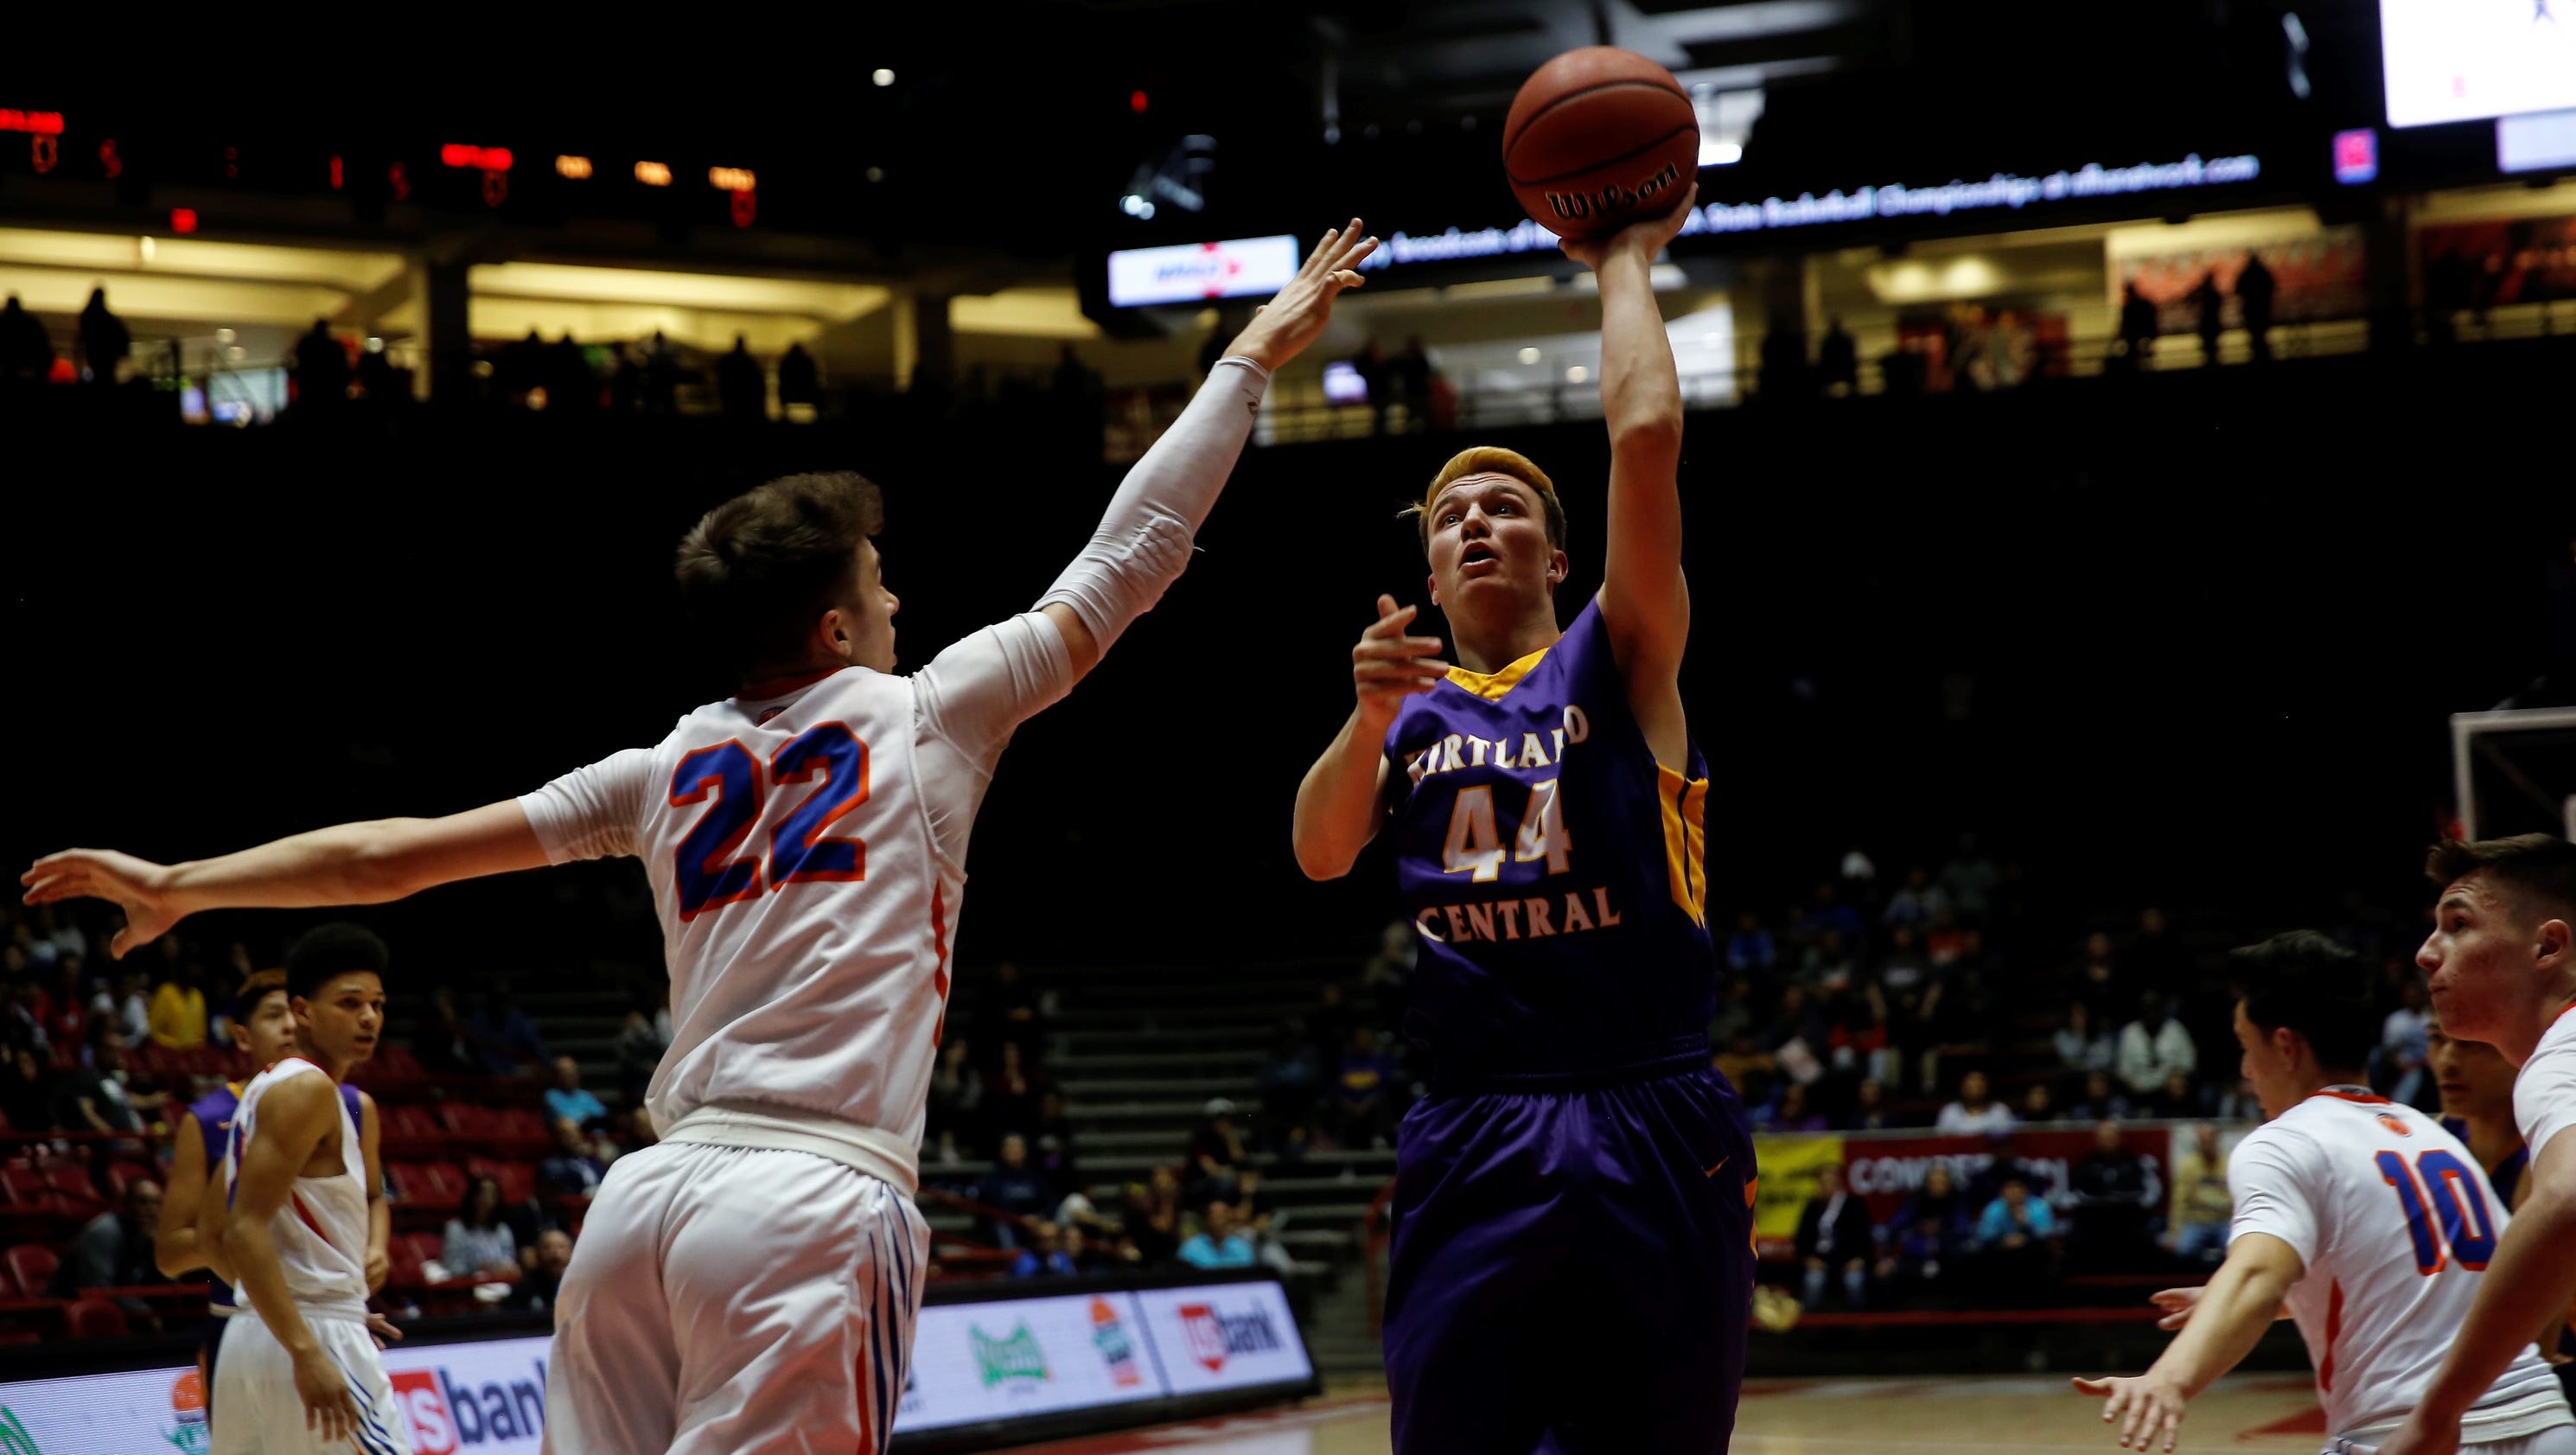 Area basketball players named to All-State teams